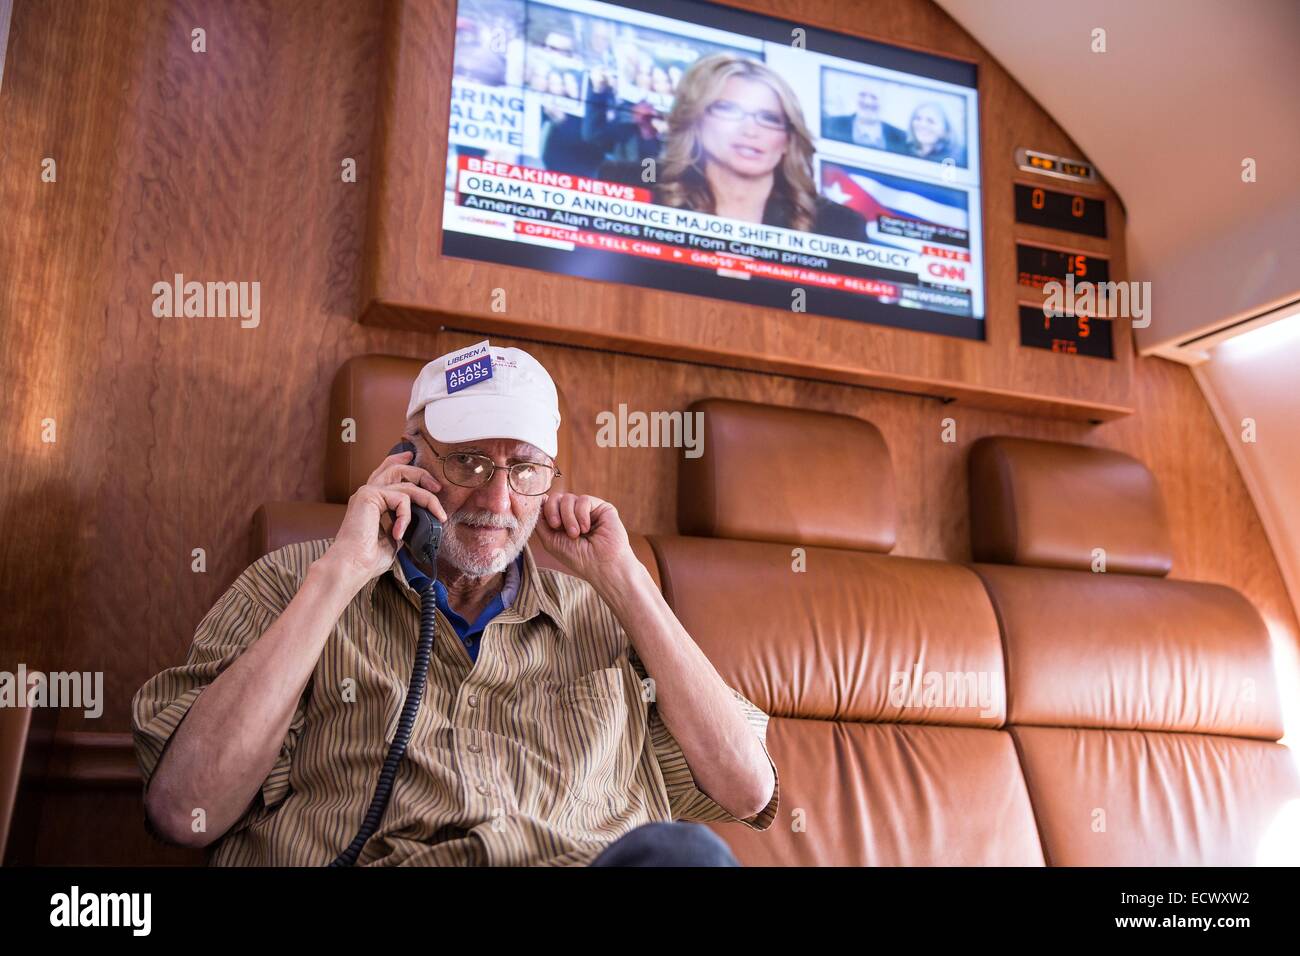 USAID contractor Alan Gross, imprisoned in Cuba for five years, speaks with President Barack Obama by phone from onboard a government plane headed back to Washington following his release December 17, 2014 near Havana, Cuba. Stock Photo